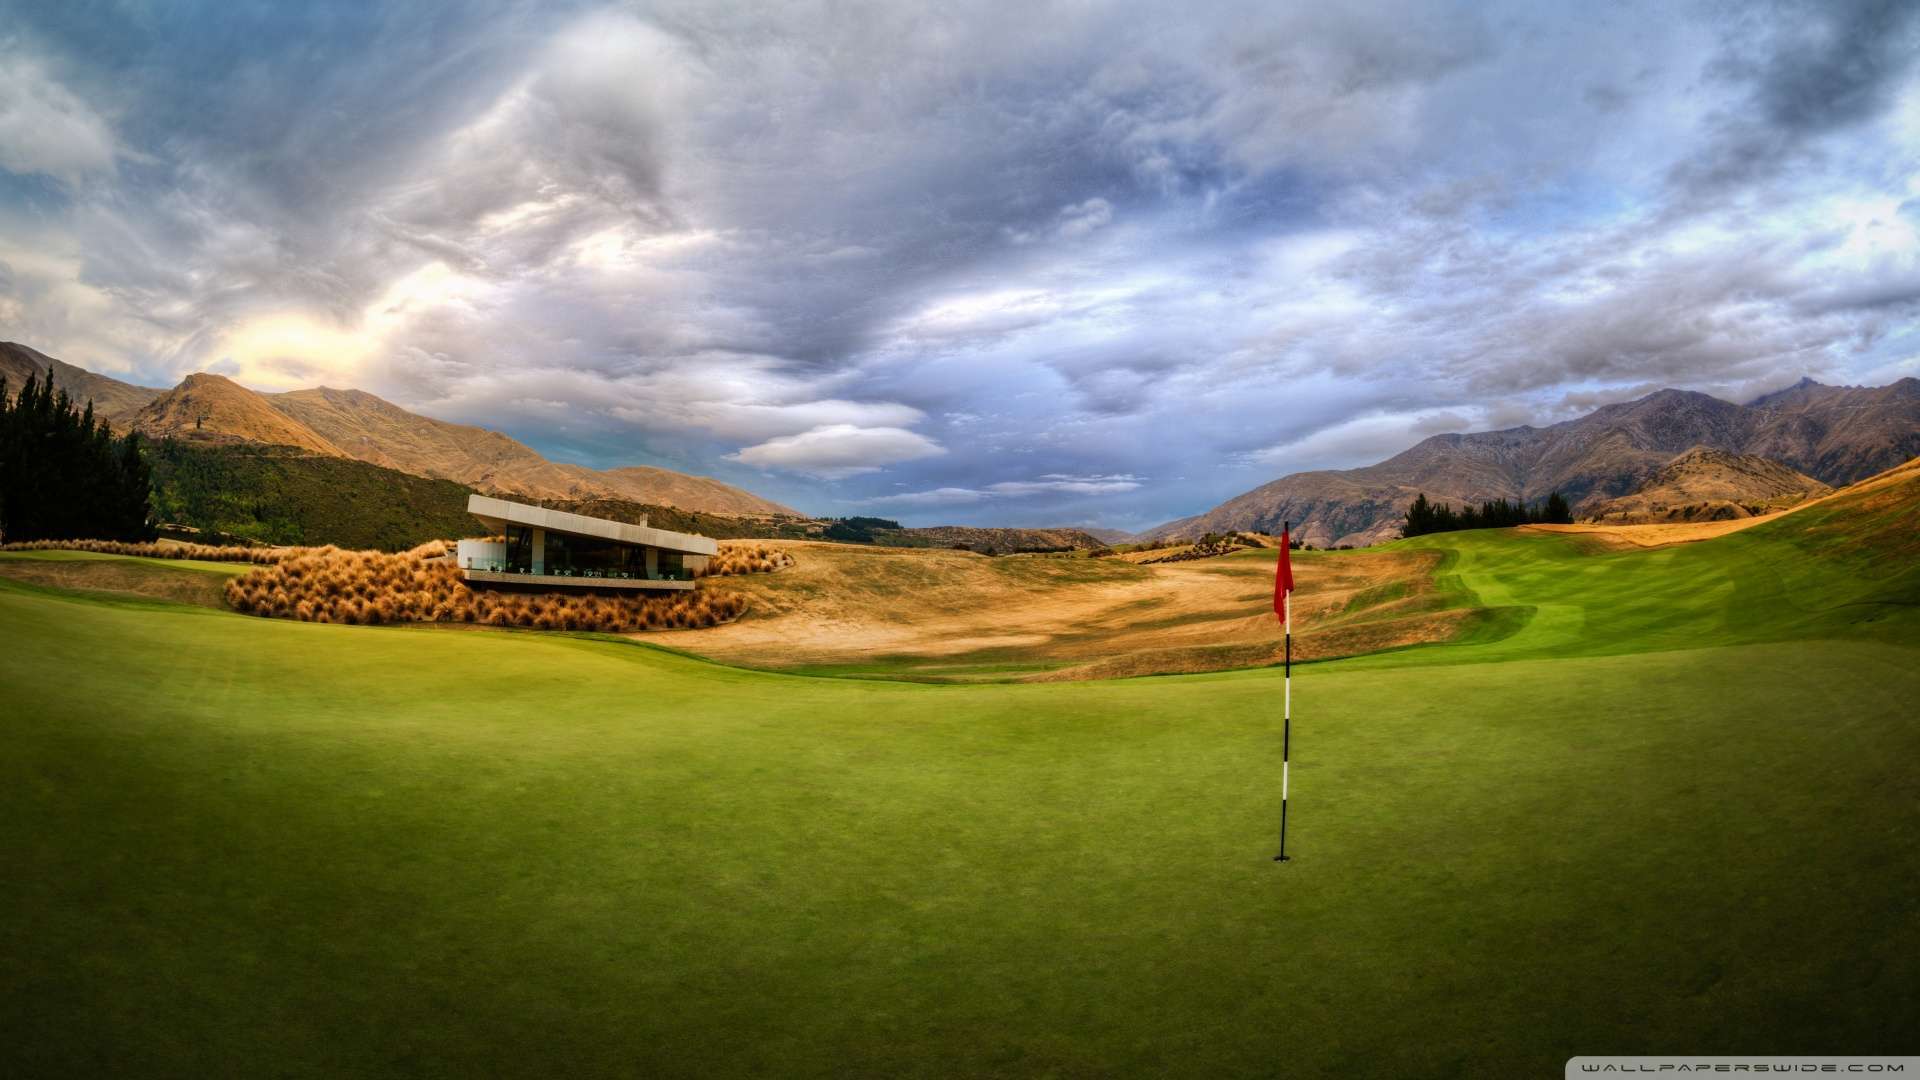 Wallpaper Beautiful Golf Course 1080p HD Upload At